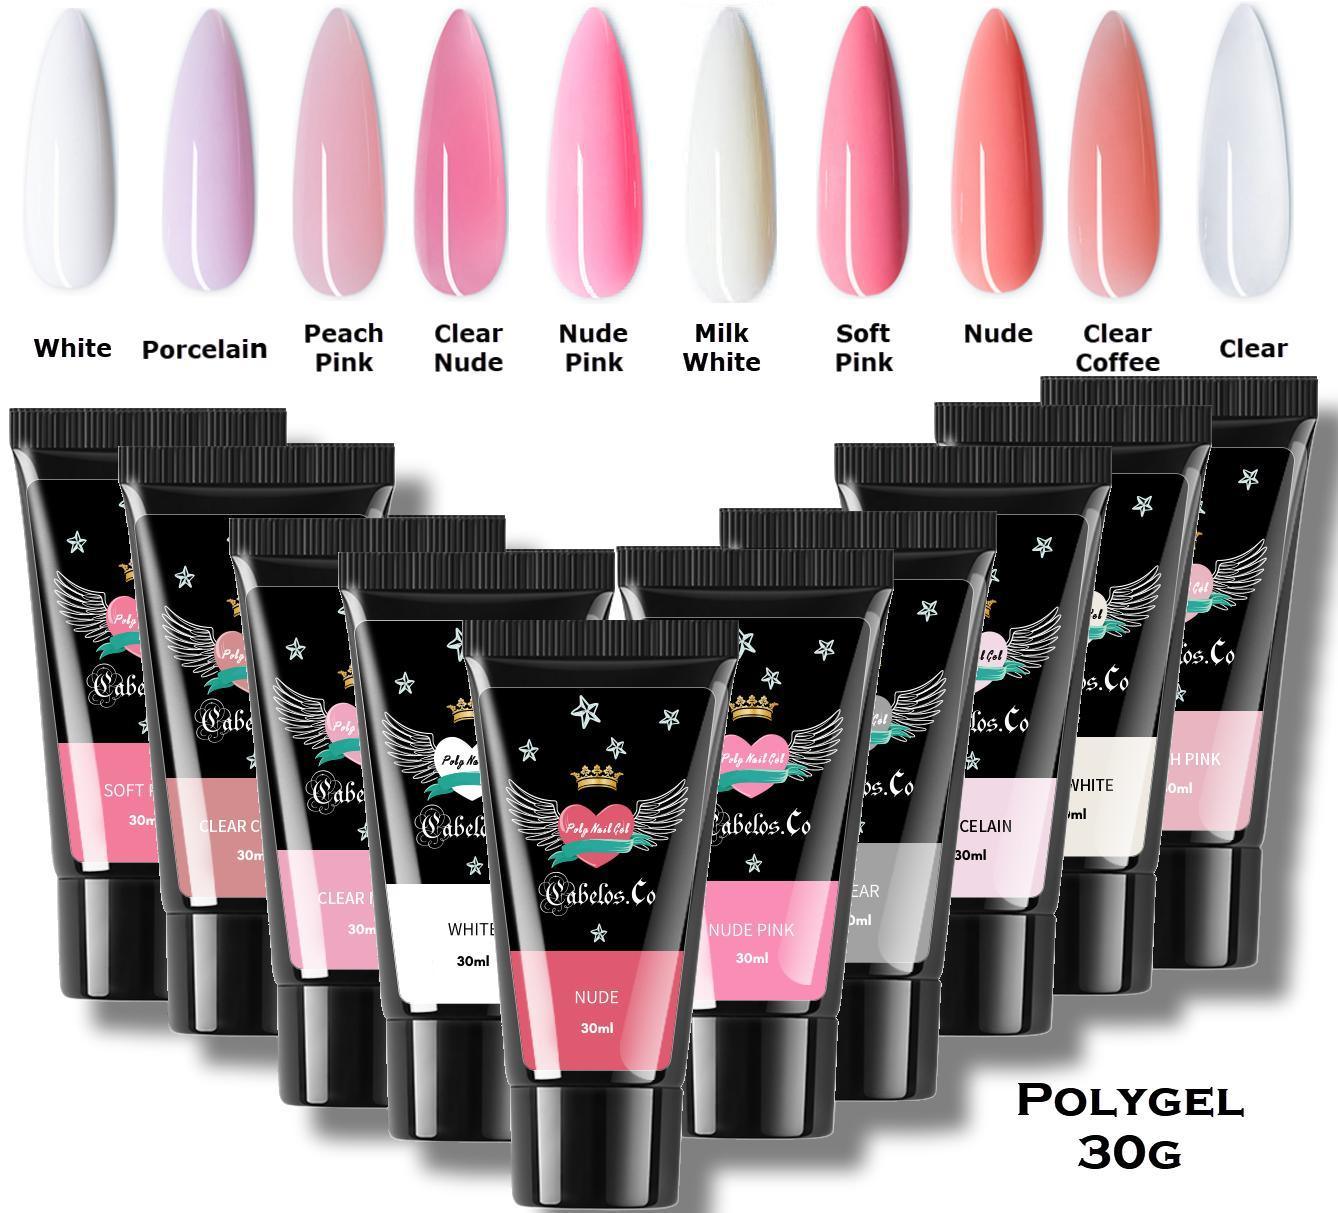 POLYGEL KIT WTH APPLICATION KIT FOR NAIL EXTENSIONS (MULTICOLOR)